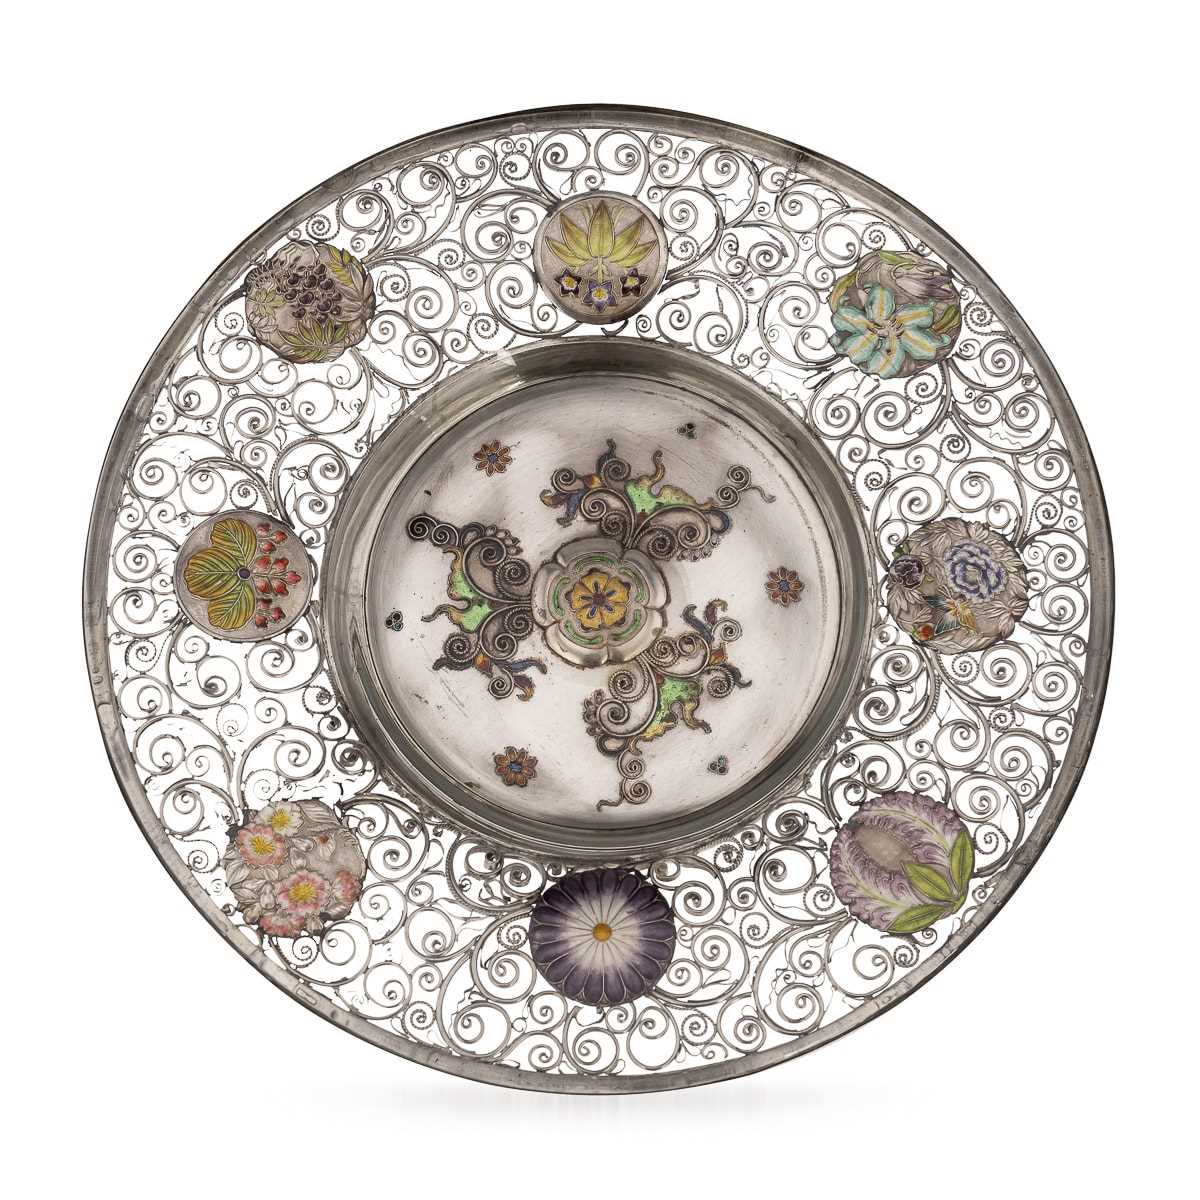 A MEIJI PERIOD SOLID SILVER AND ENAMEL DISH BY KOUEI CIRCA 1900 - Image 2 of 18